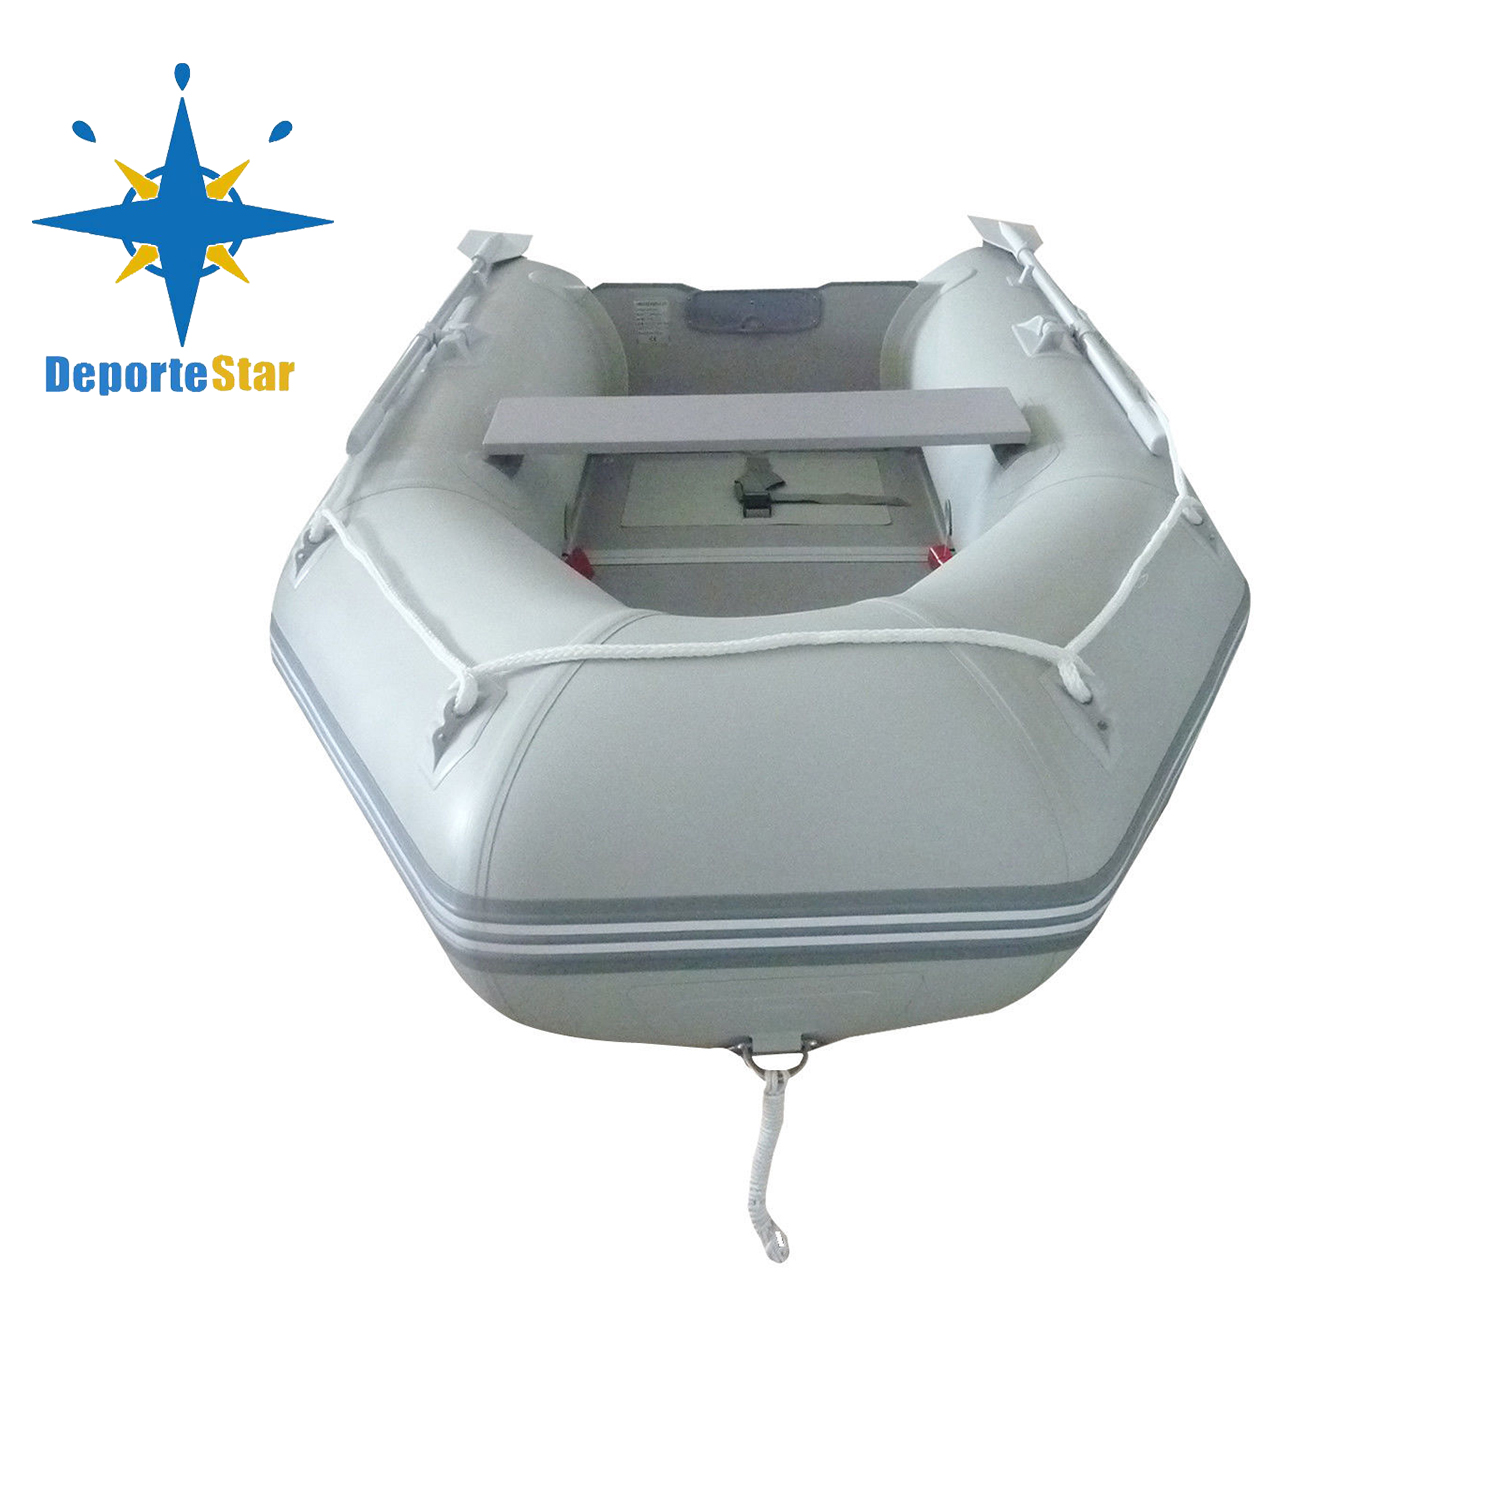 River/ocean mini zodiac boat inflatable boat with cabin inflatable boat